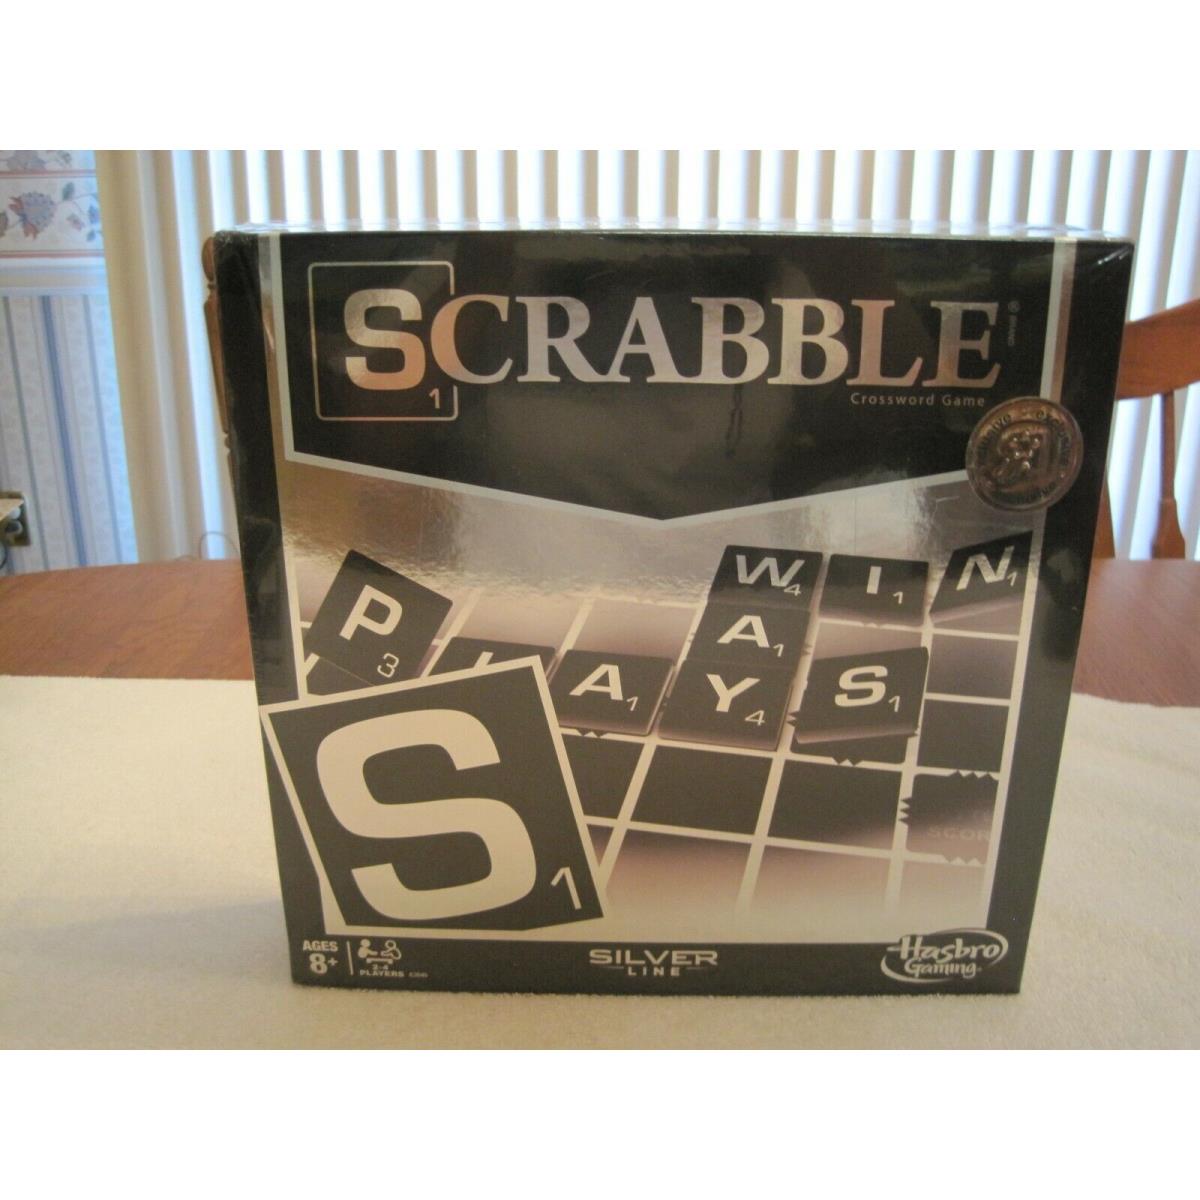 Hasbro Gaming Silver Line Scrabble Toys R US Exclusive--new